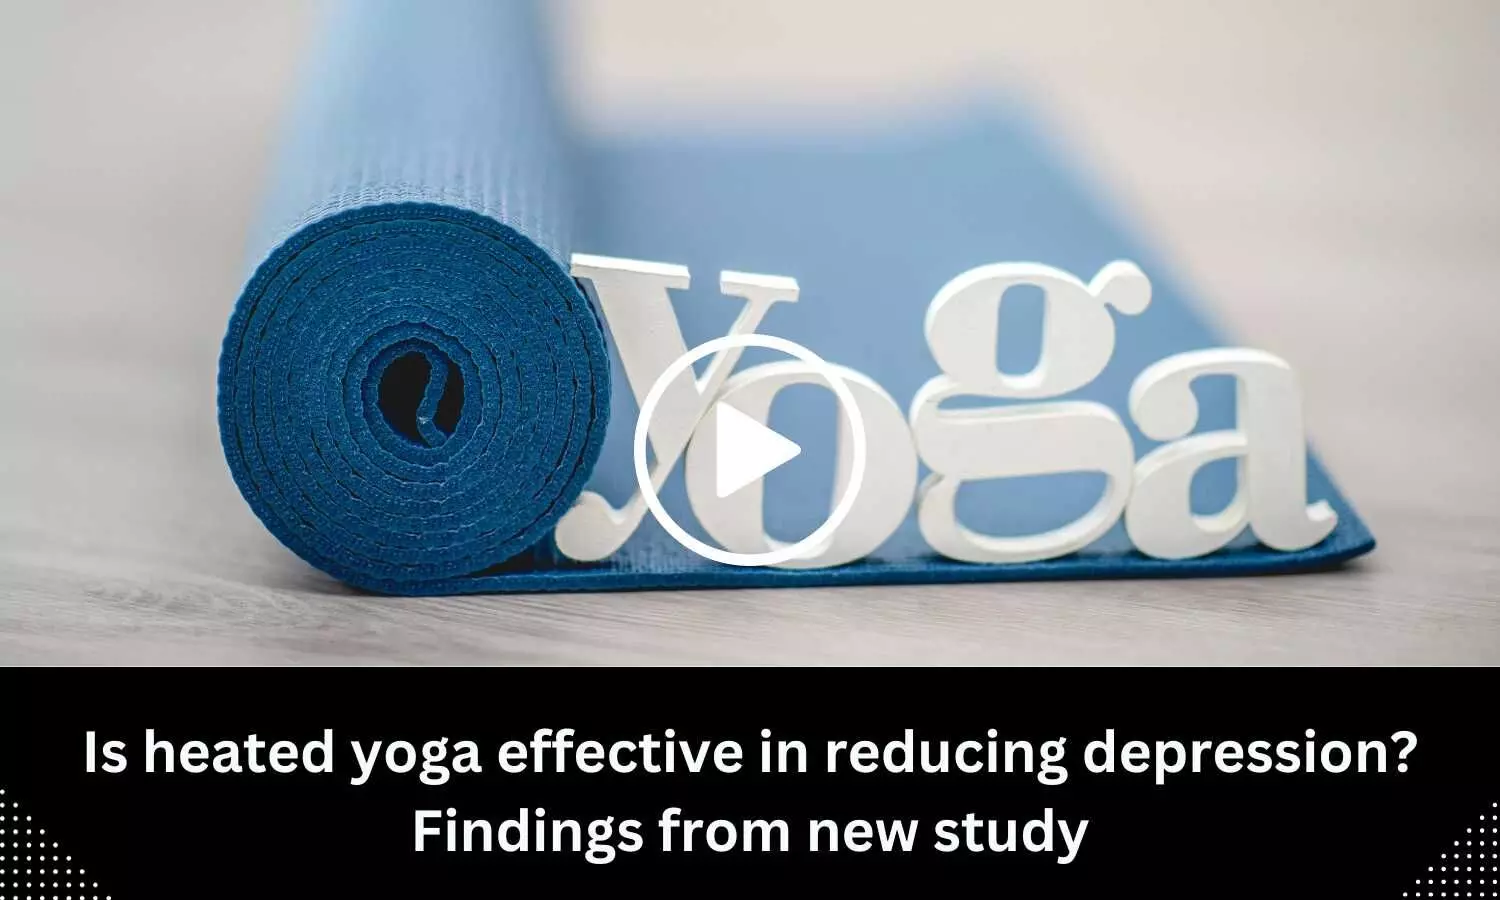 Is heated yoga effective in reducing depression? Findings from new study